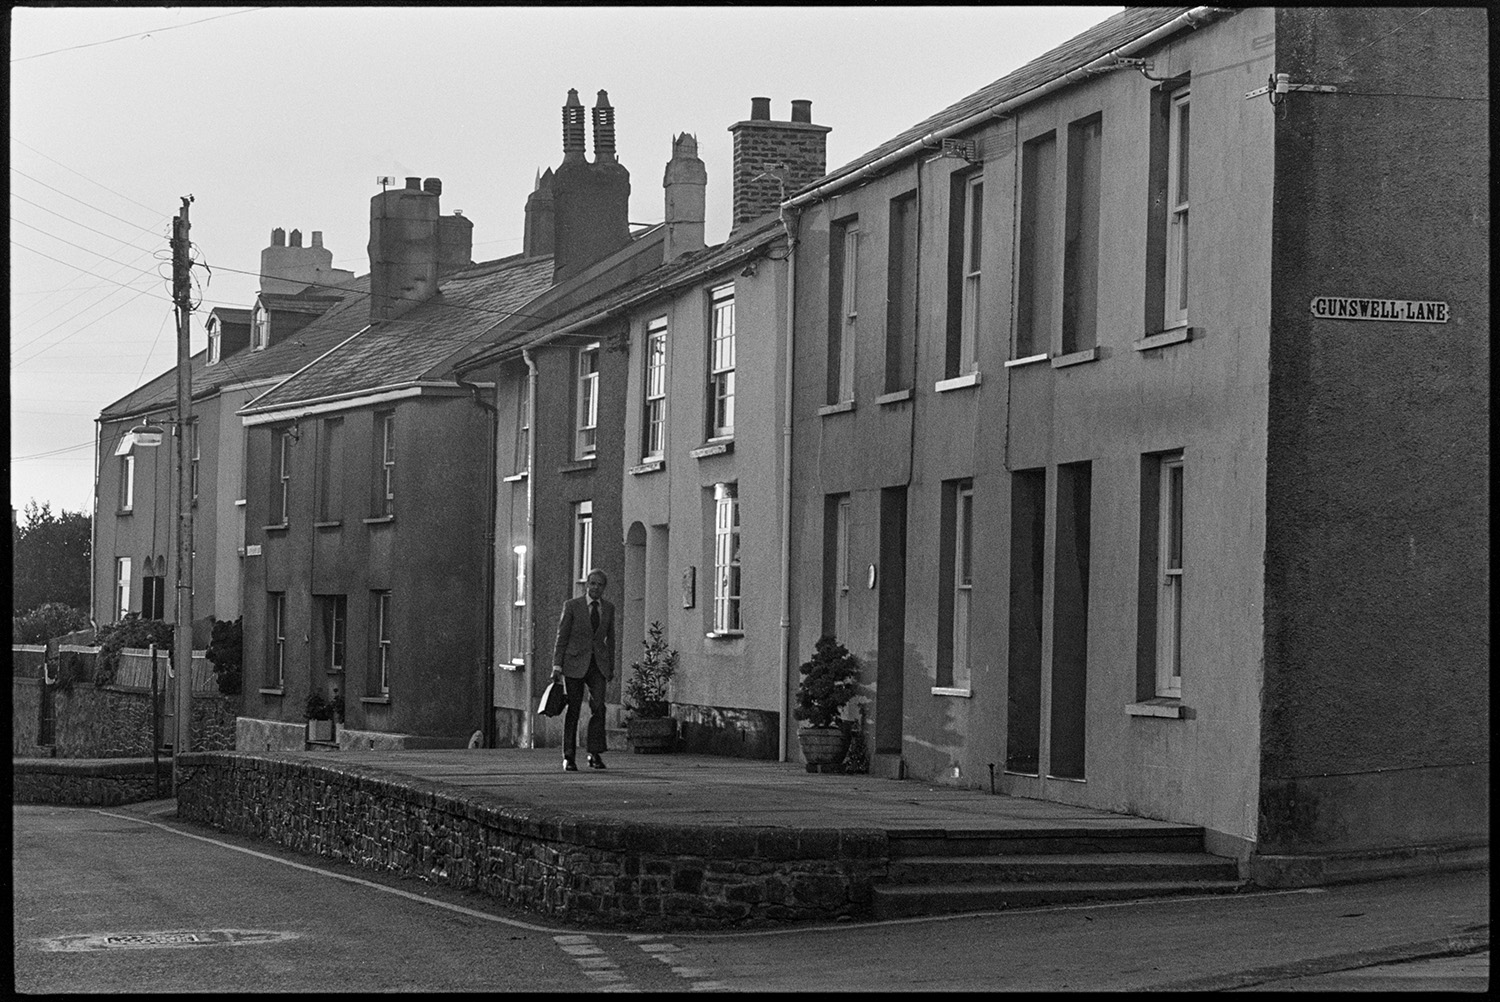 Doctor on rounds walking down street of terraced houses. 
[Doctor Richard Westcott walking past terraced houses in West Street, South Molton on his rounds to visit patients.]